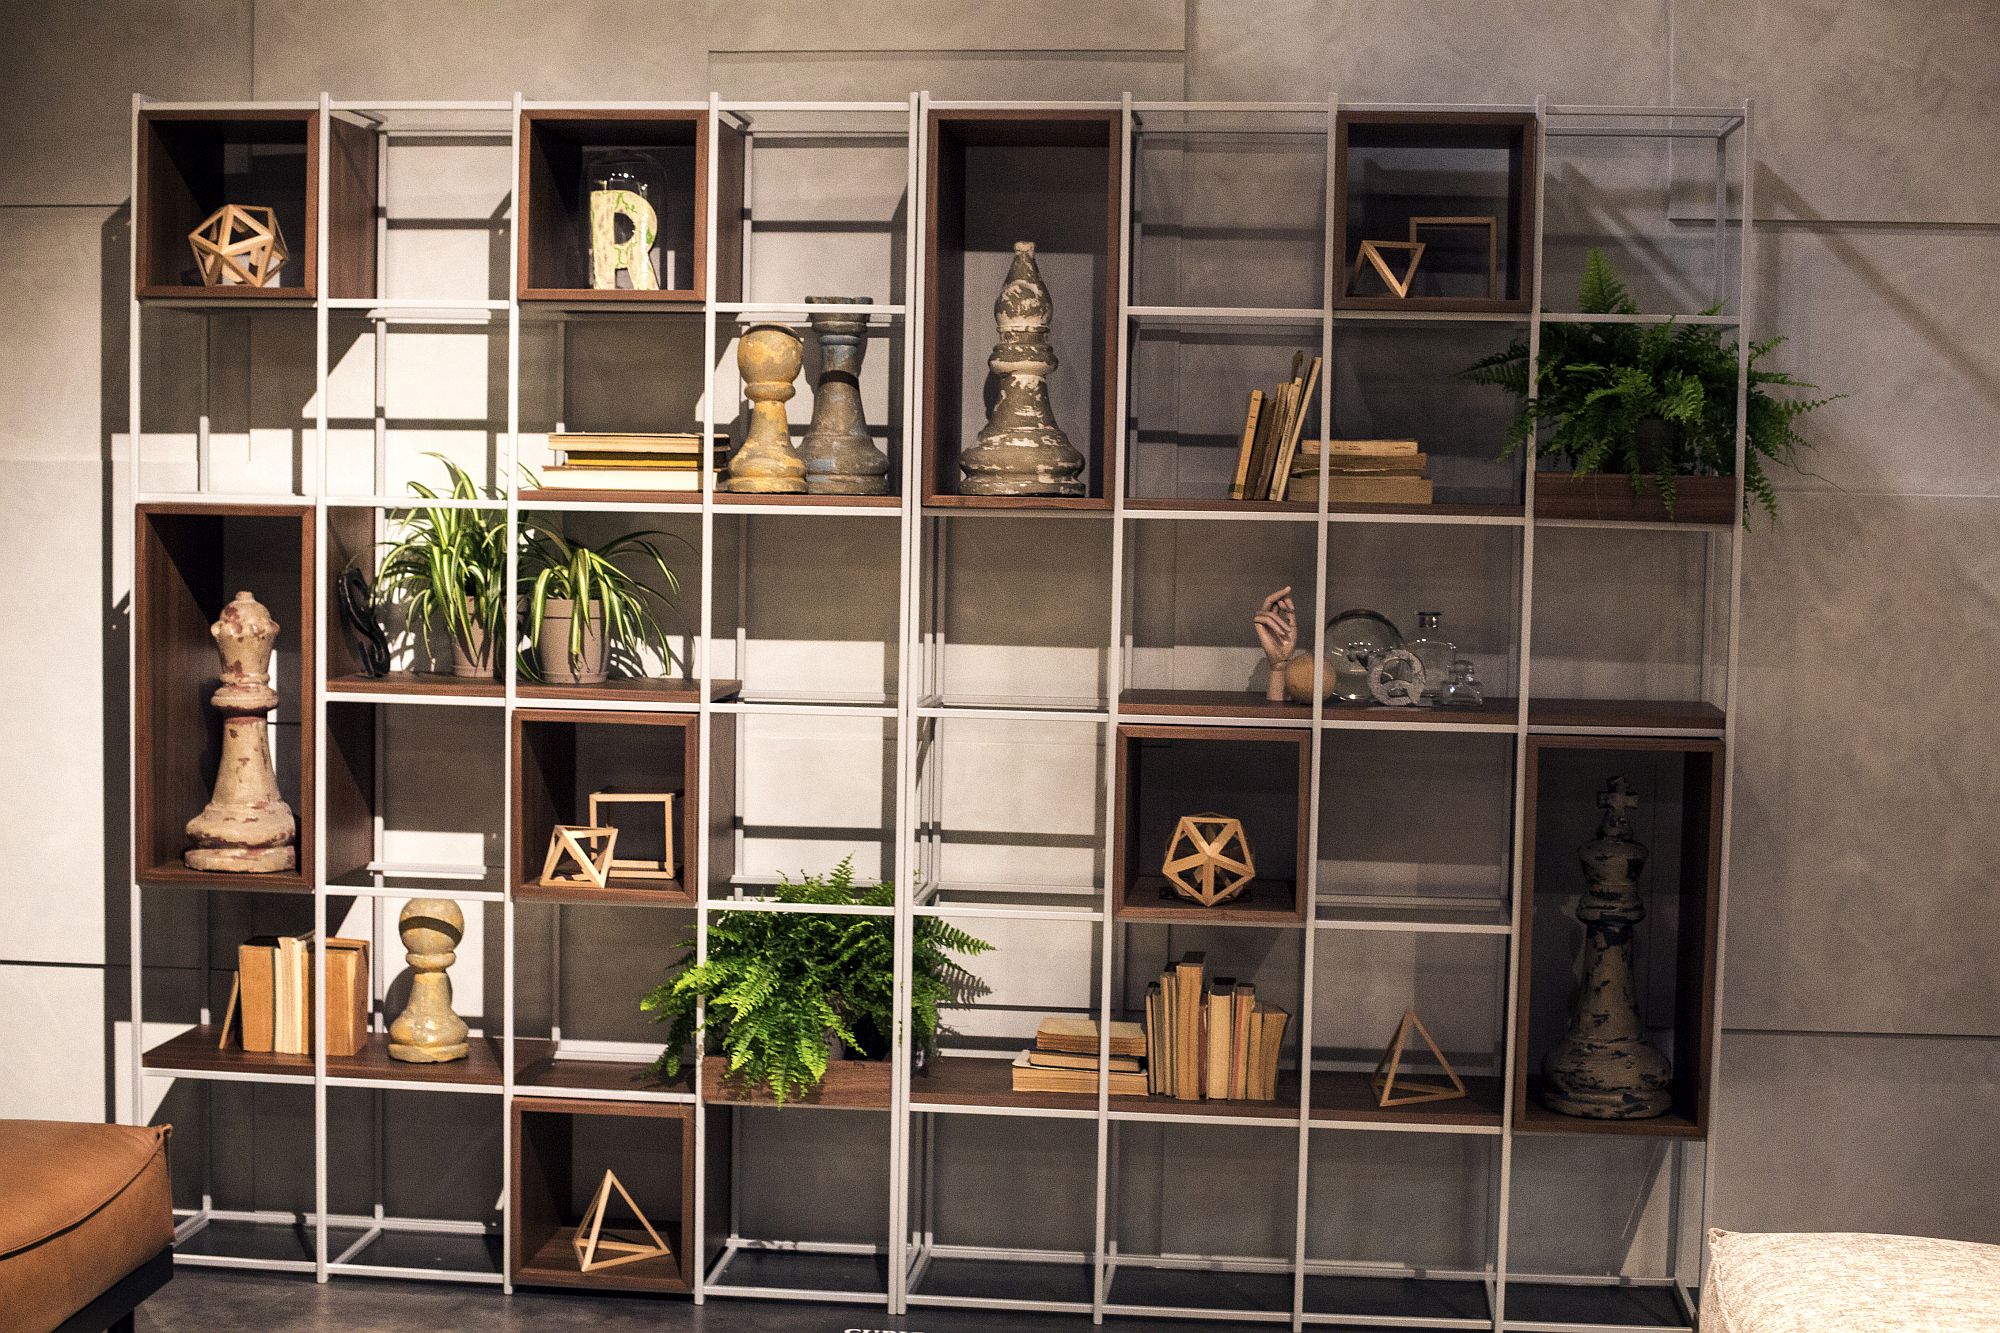 Metallic-frame-coupled-with-wooden-boxes-to-create-an-inimitable-shelf